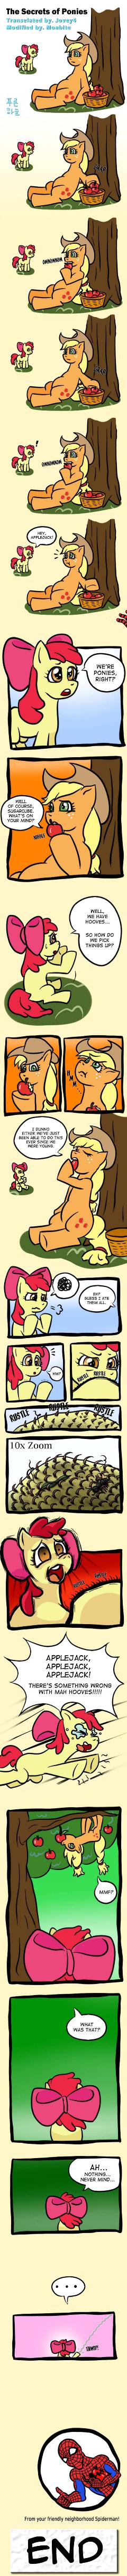 The Secrets of Ponies translated ver.